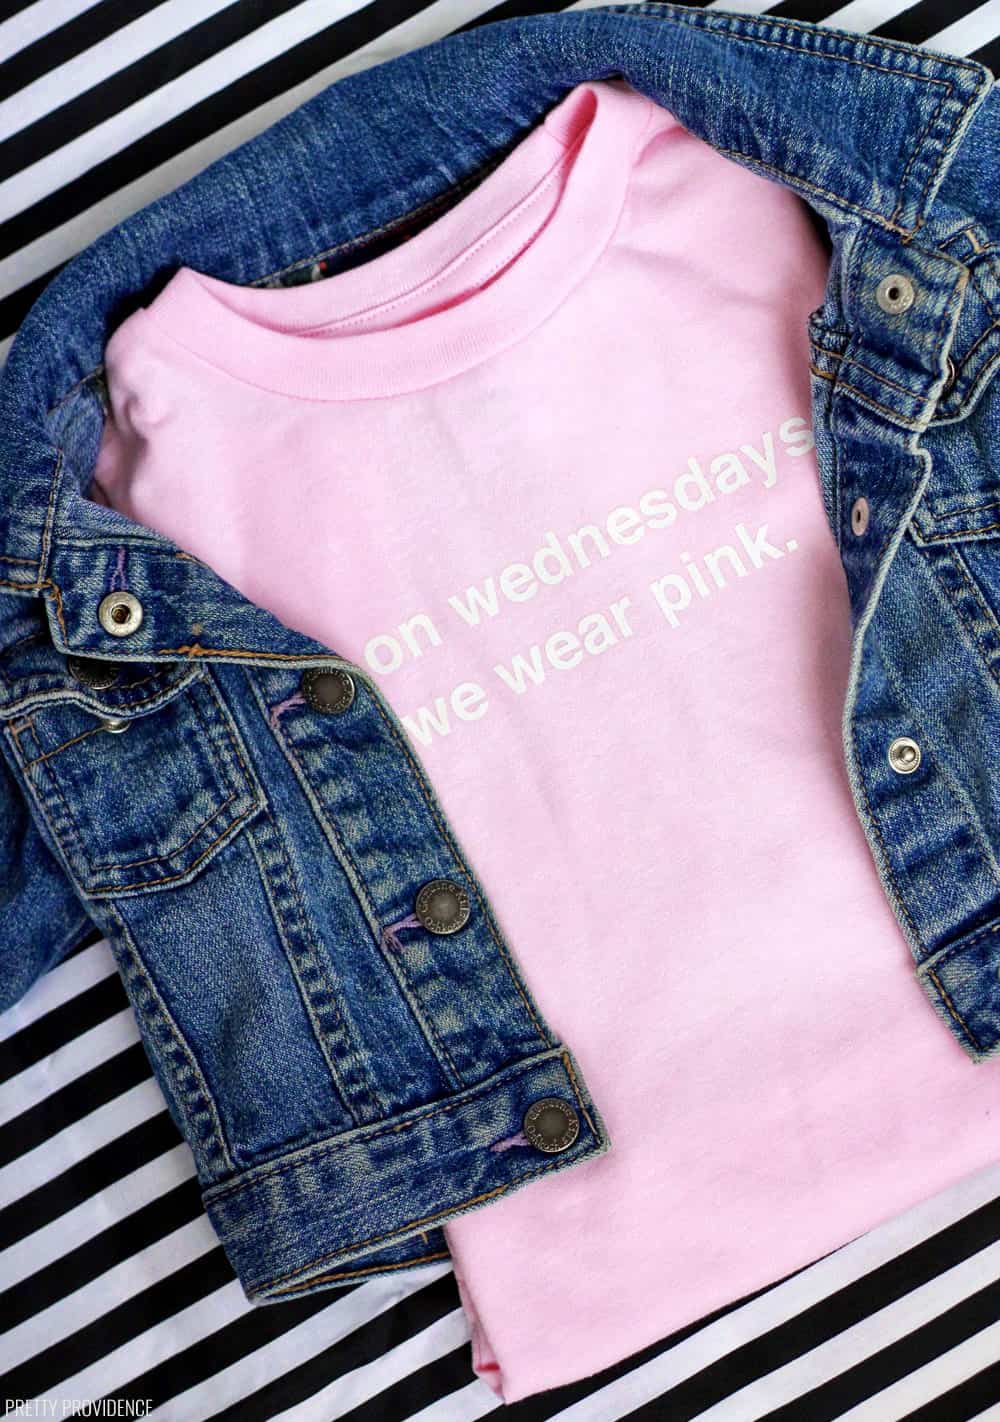 "On Wednesdays We Wear Pink" Mean girls inspired t-shirt